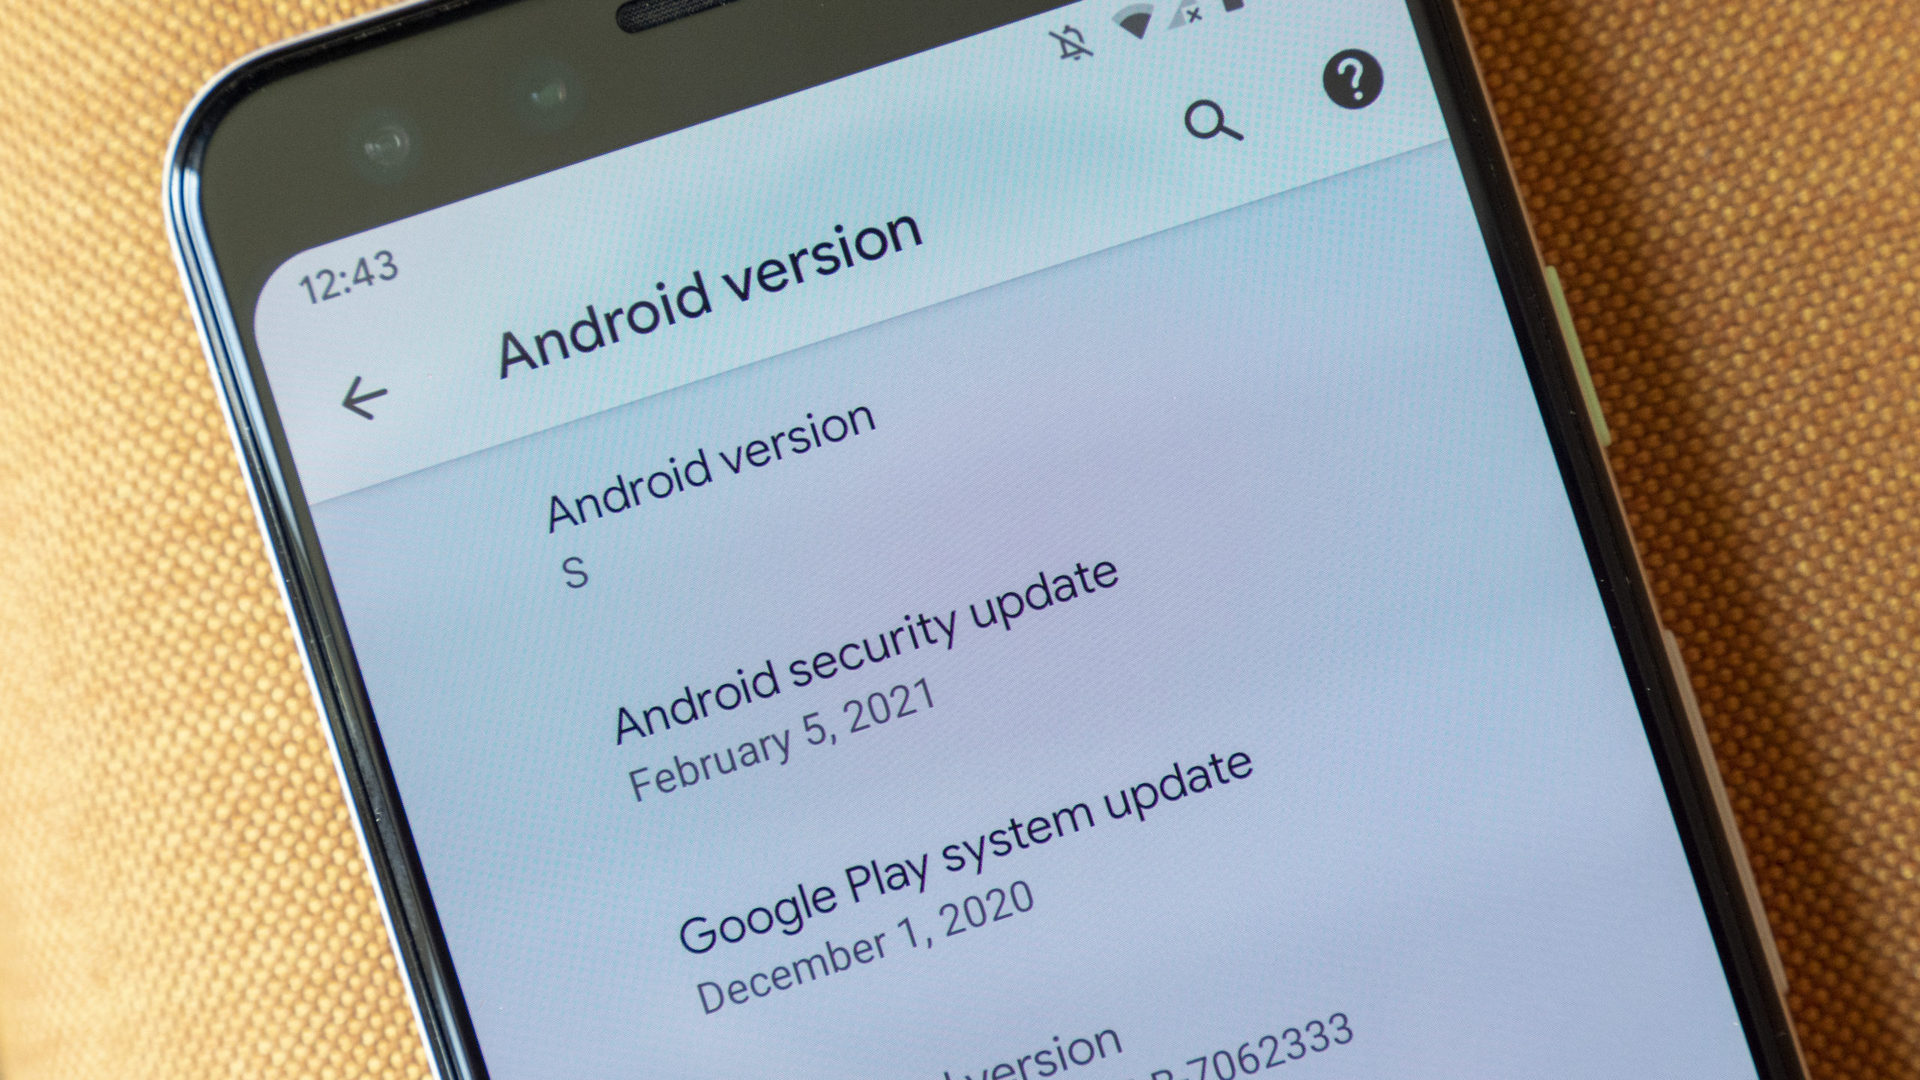 Android 12 developer preview screen showing Android version S